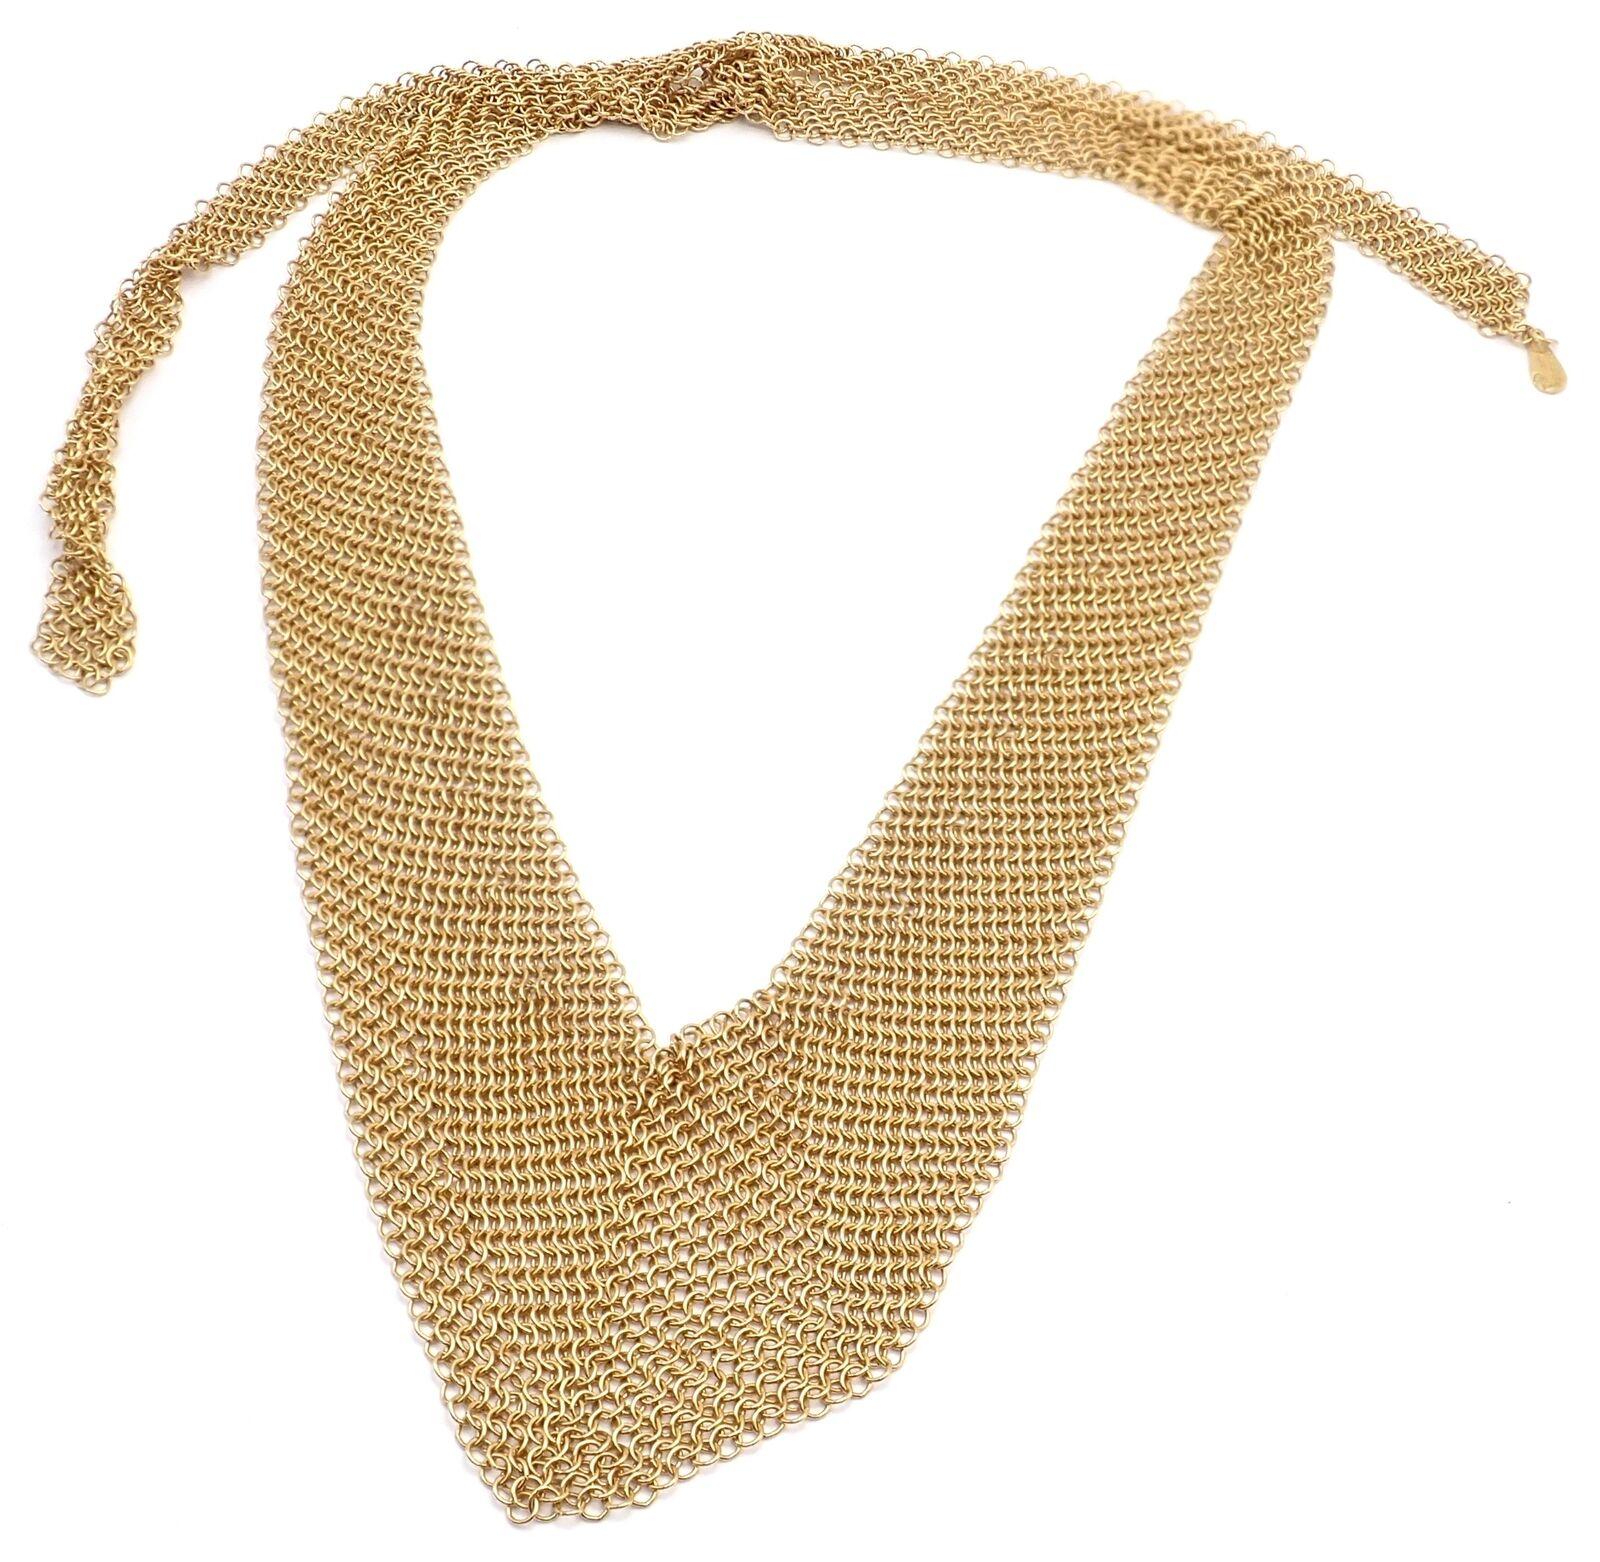 Vintage Tiffany & Co Elsa Peretti Mesh Bib Scarf Yellow Gold Necklace In Excellent Condition For Sale In Holland, PA